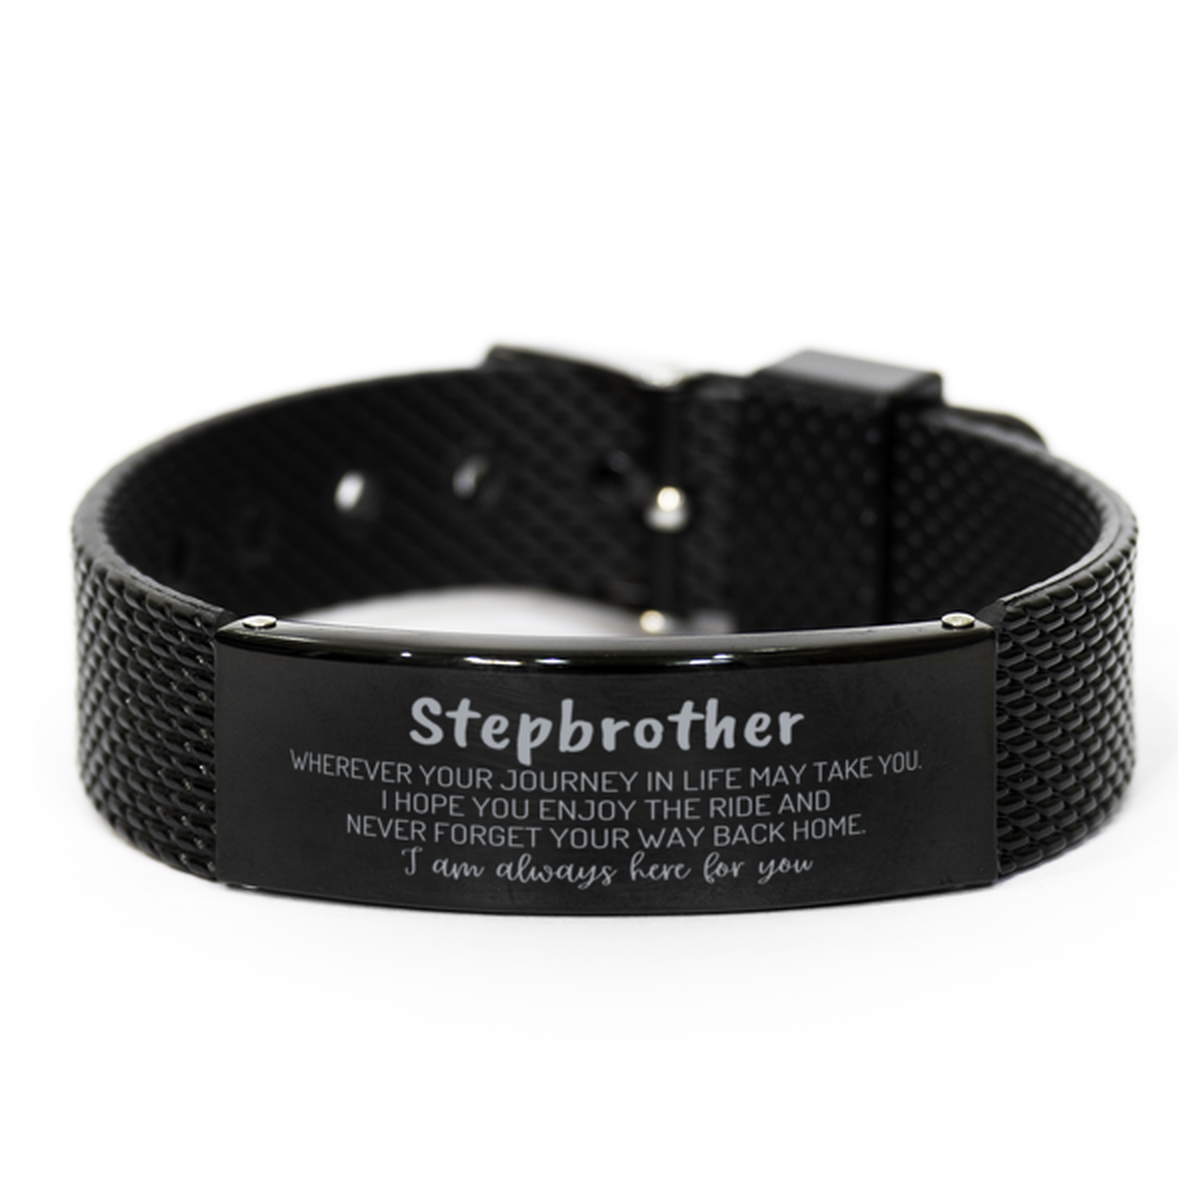 Stepbrother wherever your journey in life may take you, I am always here for you Stepbrother Black Shark Mesh Bracelet, Awesome Christmas Gifts For Stepbrother, Stepbrother Birthday Gifts for Men Women Family Loved One